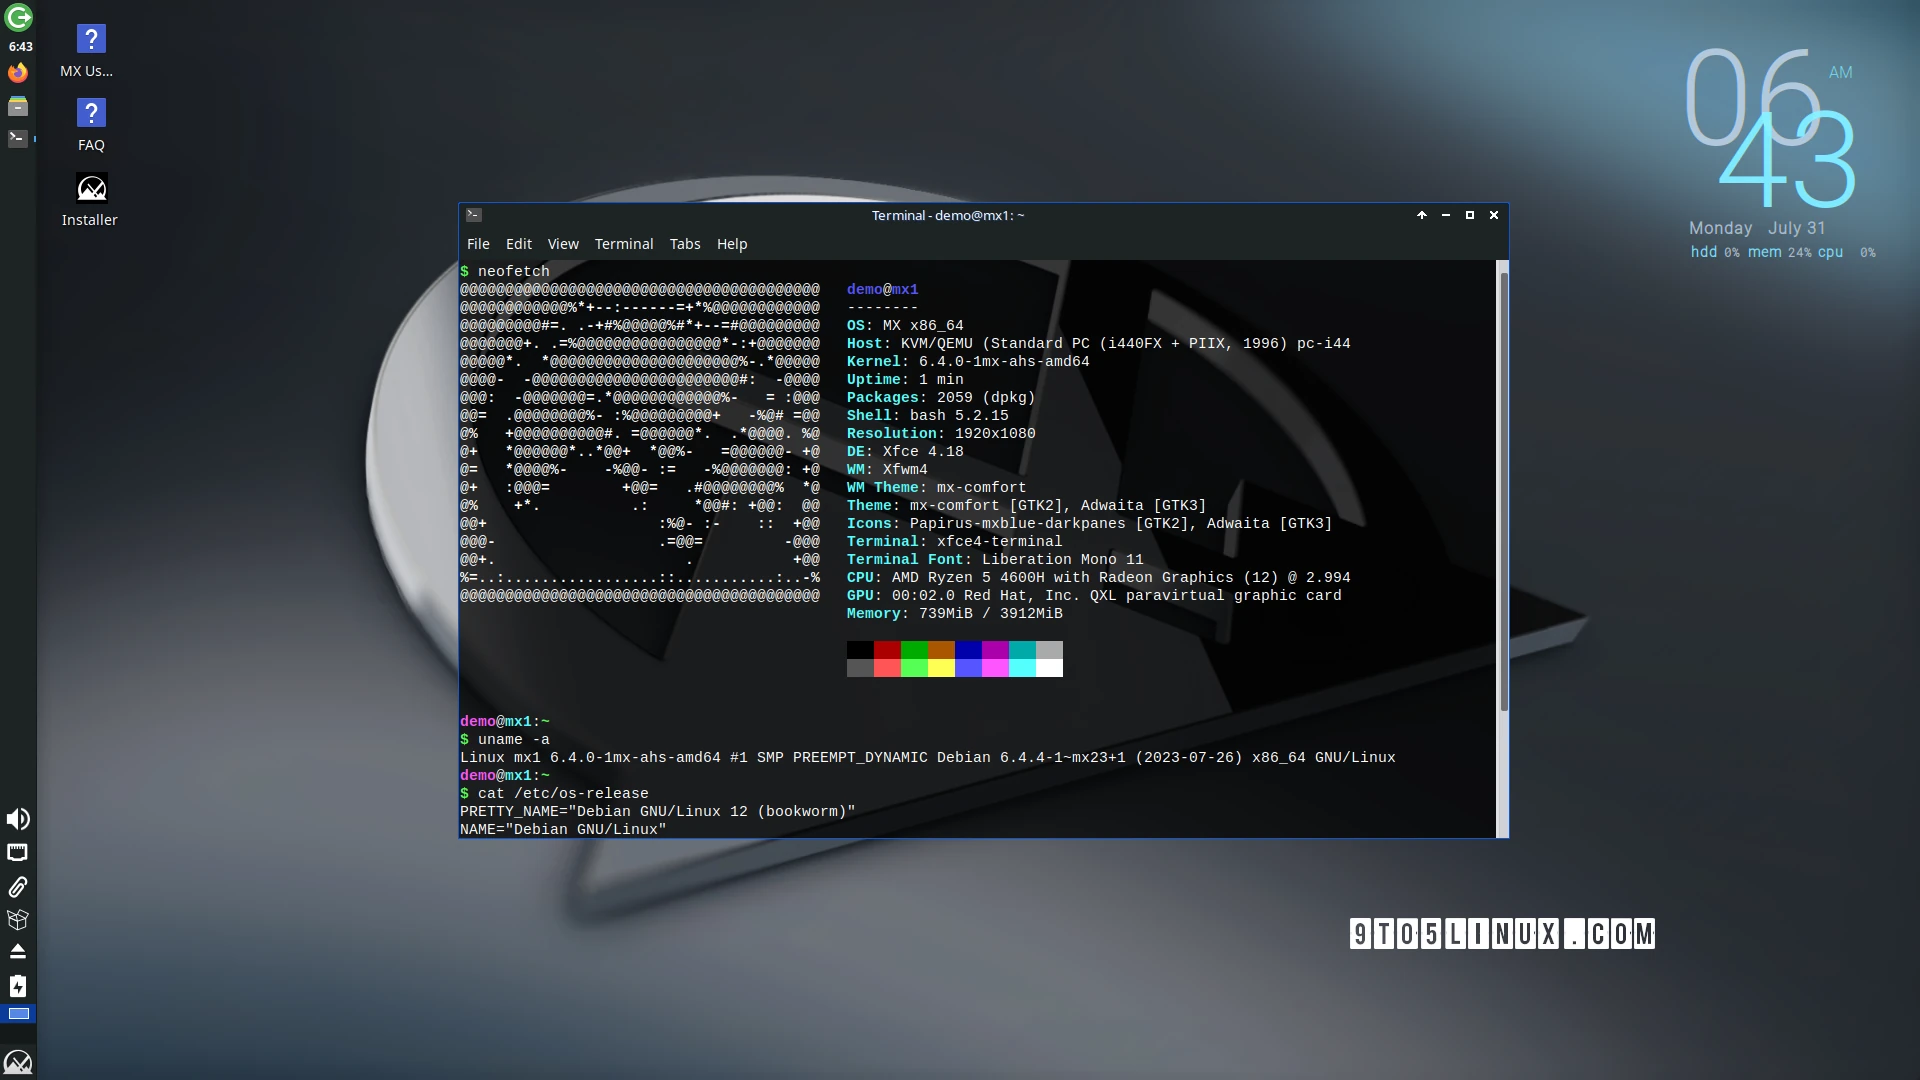 MX Linux 23 “Libretto” Is Out with Linux Kernel 6.4, Based on Debian Bookworm